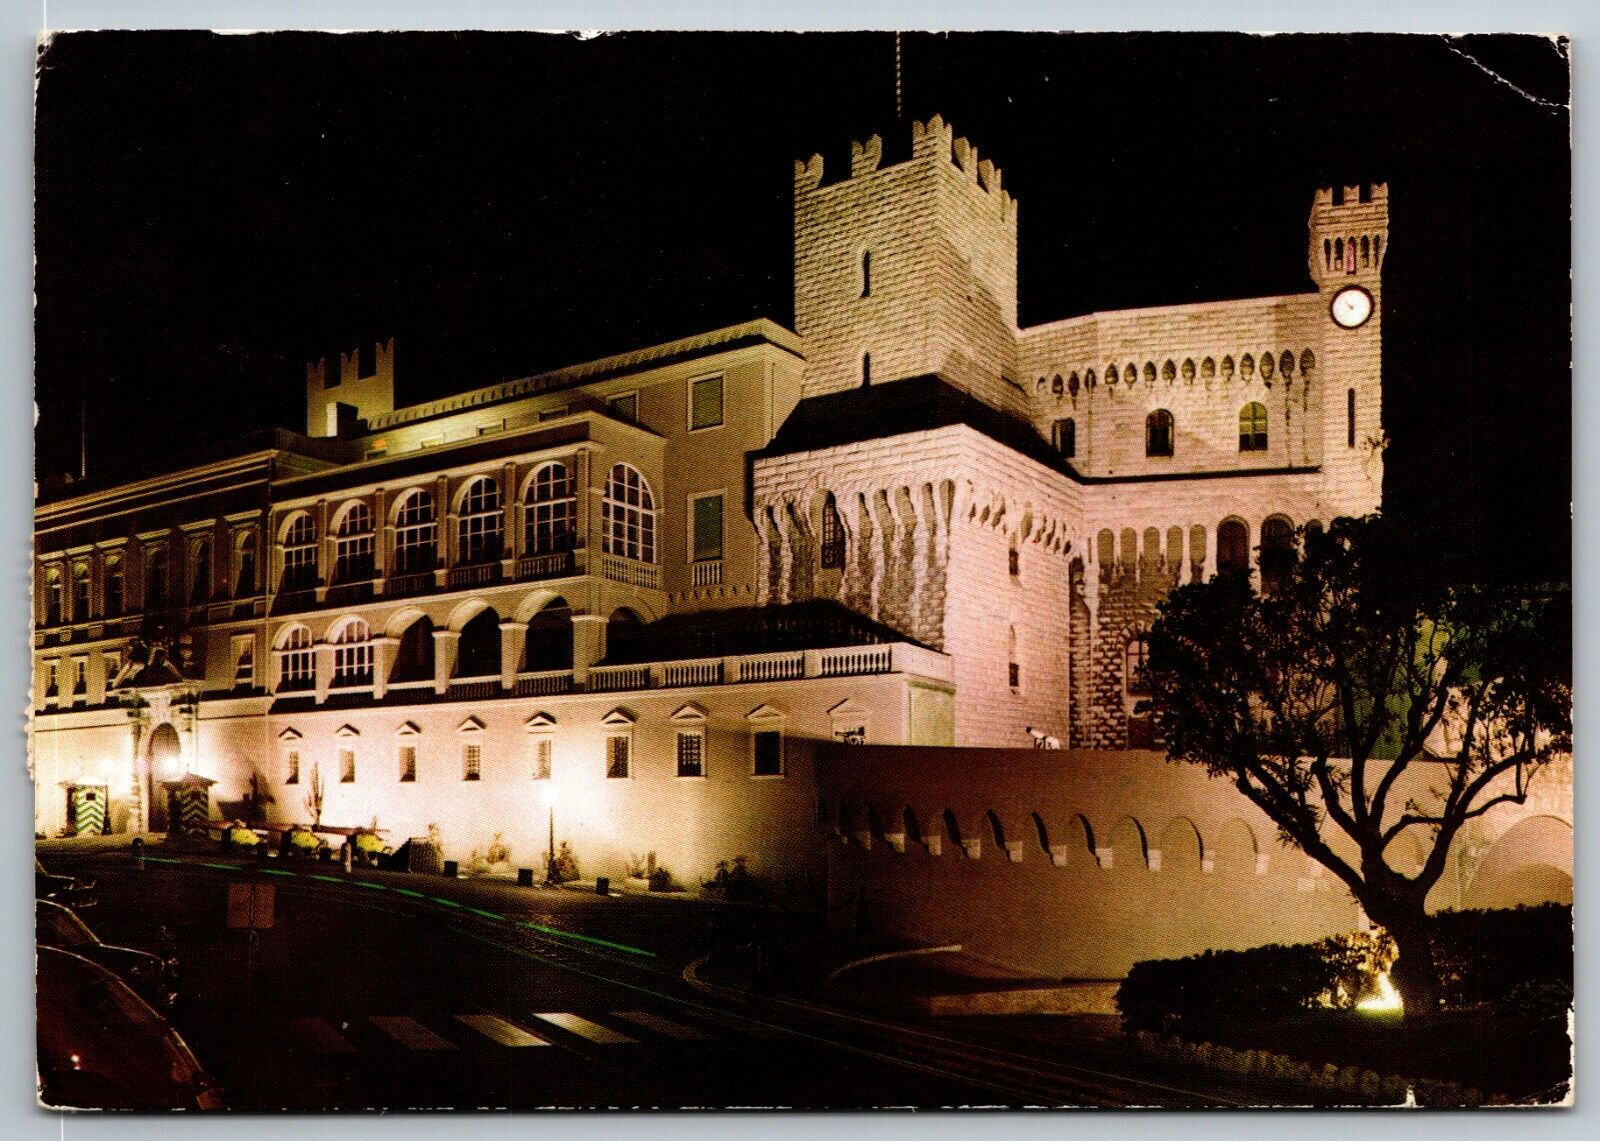 PALACE OF HSH PRINCE OF MONACO AT NIGHT VTG 4X6 POSTCARD D-1 